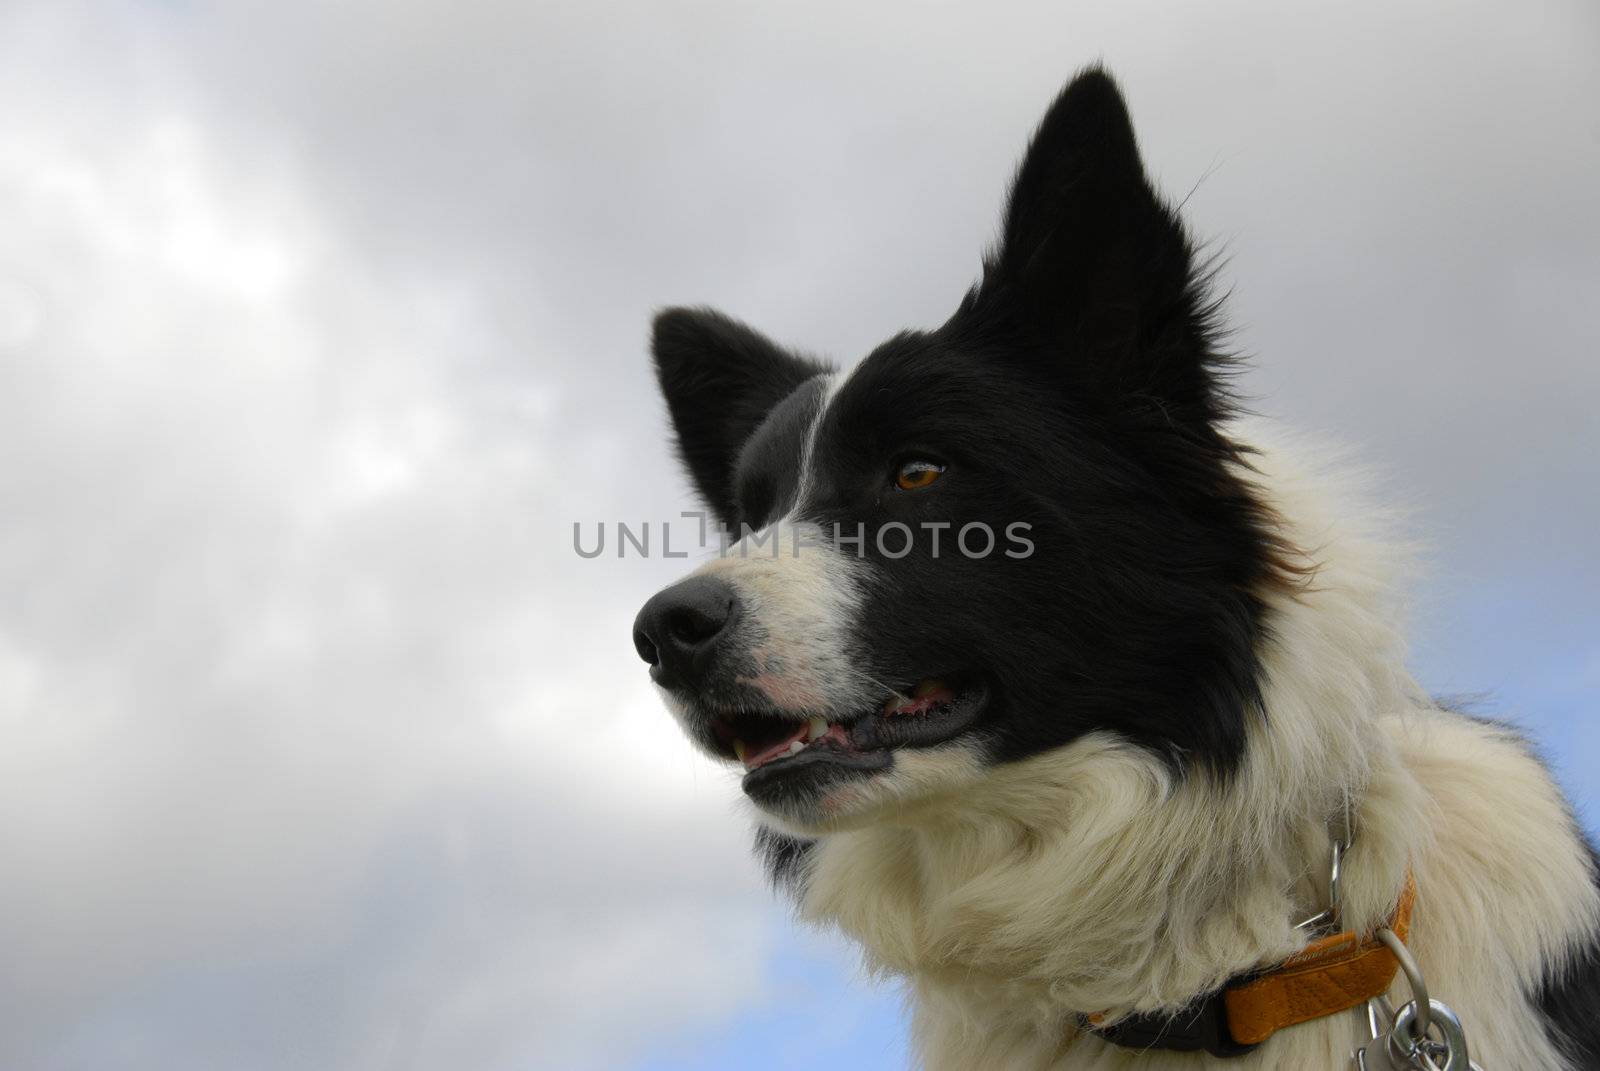 portrait of a purebred border collie and grey clouds